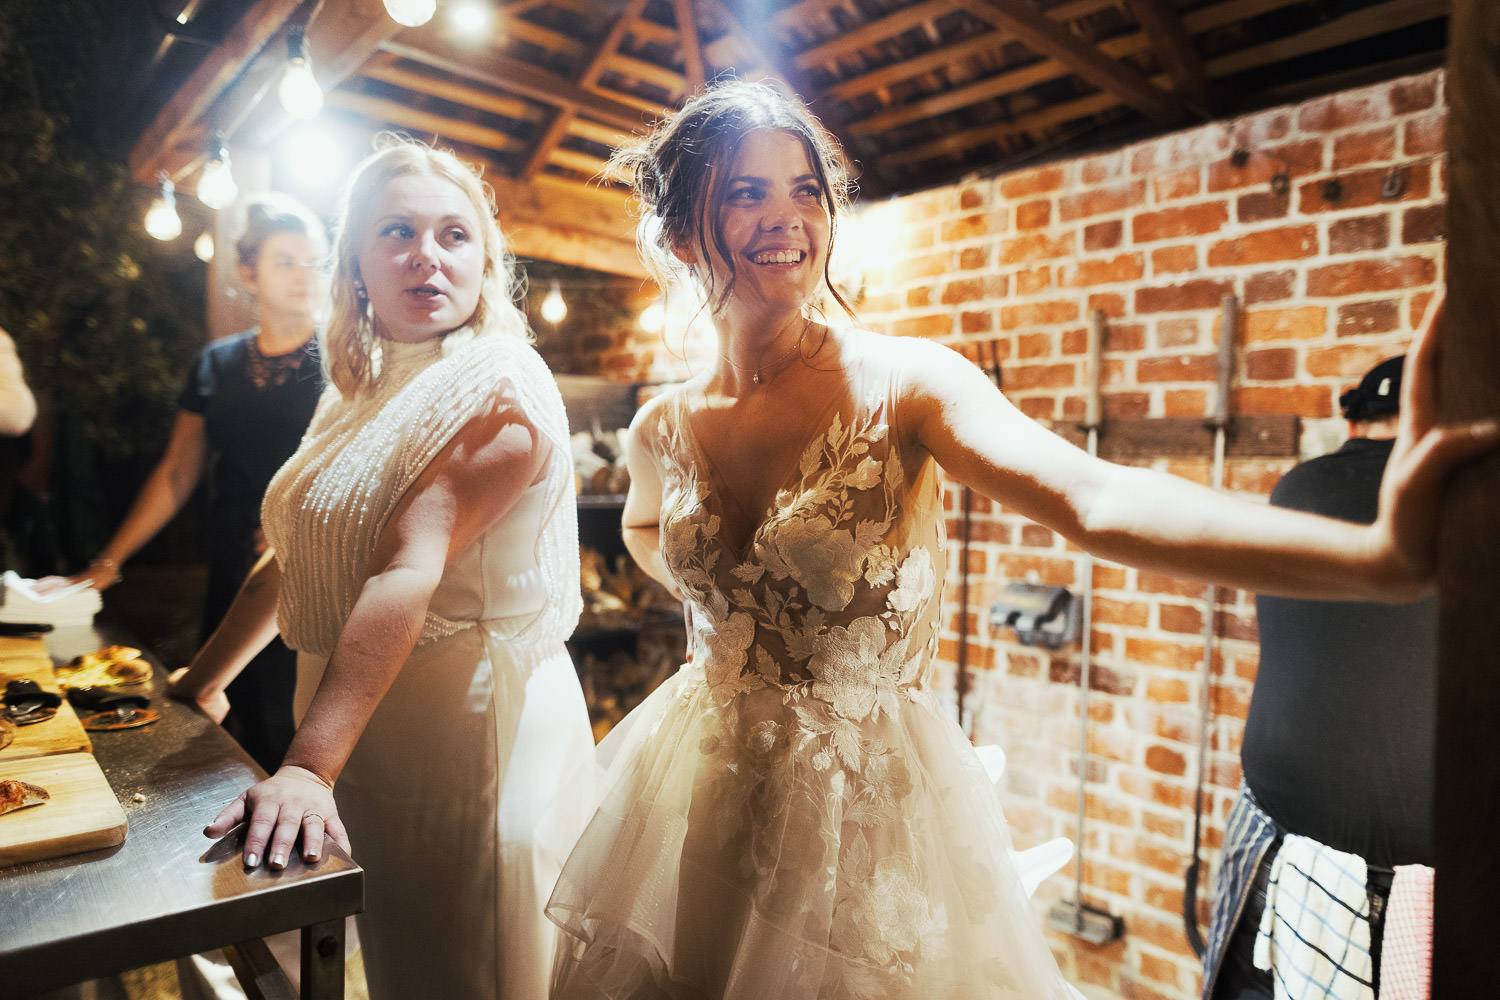 Brides stand by the illuminated pizza oven in the courtyard at Alpheton Hall Barns during the evening of their wedding day. The bride in the foreground is wearing a WTOO by Watters Montgomery dress (STYLE #12716).